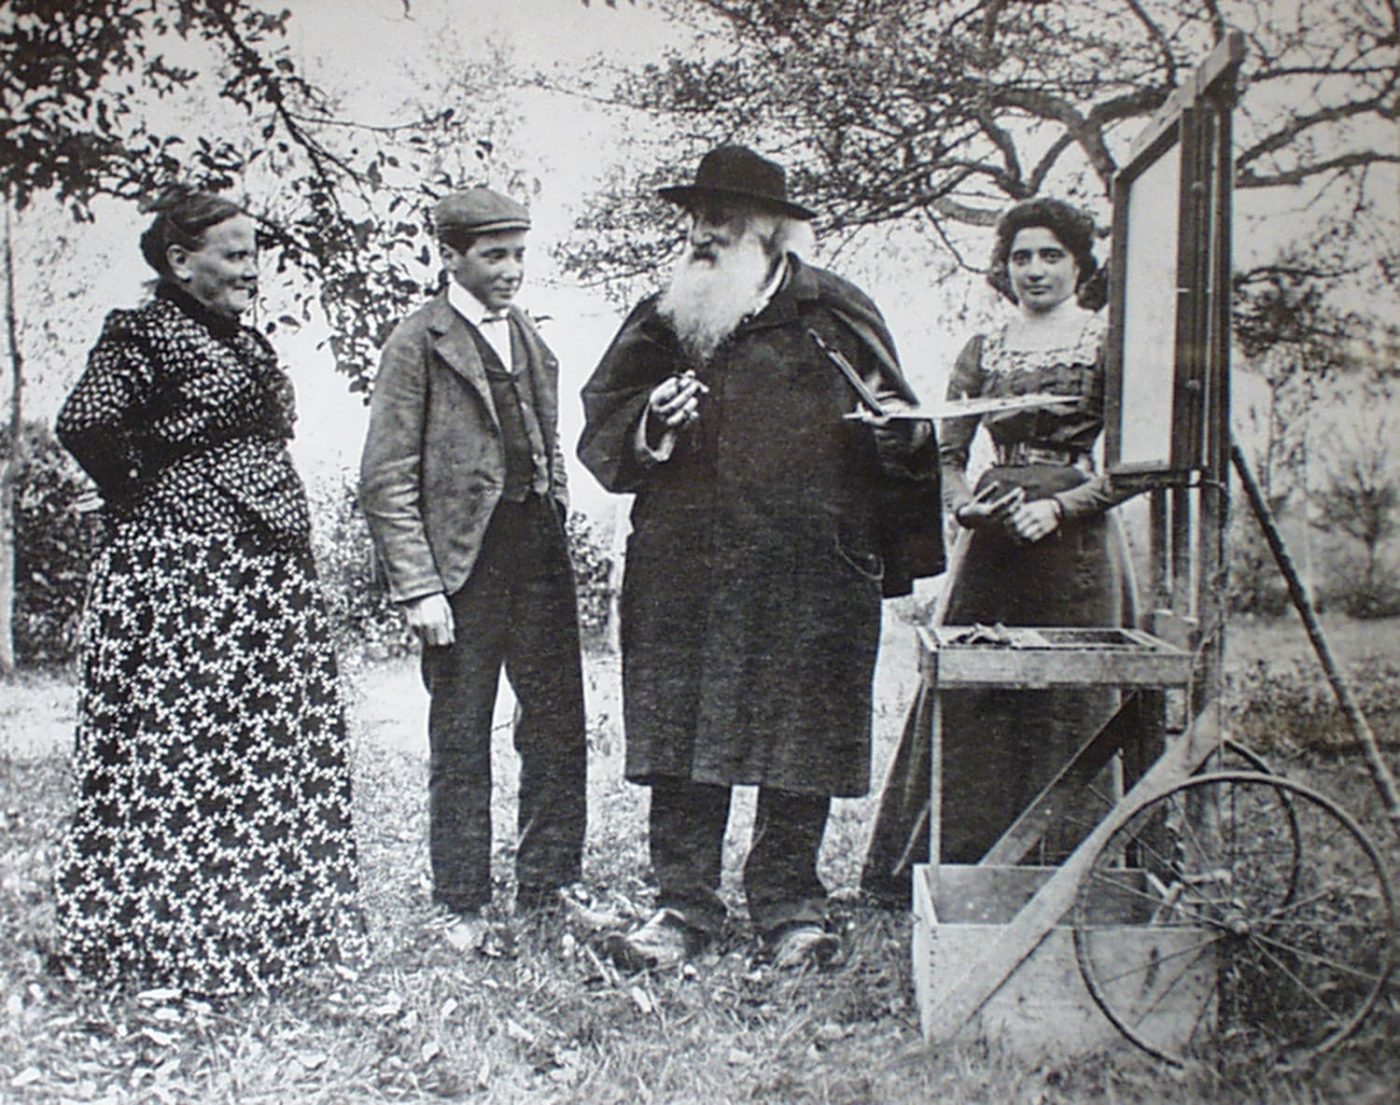 A black-and-white photo of Impressionist painter CAMILLE PISSARRO in a field in Éragny, France, with his wife, Julie, and his children PAULE-ÉMILE and Jeanne.